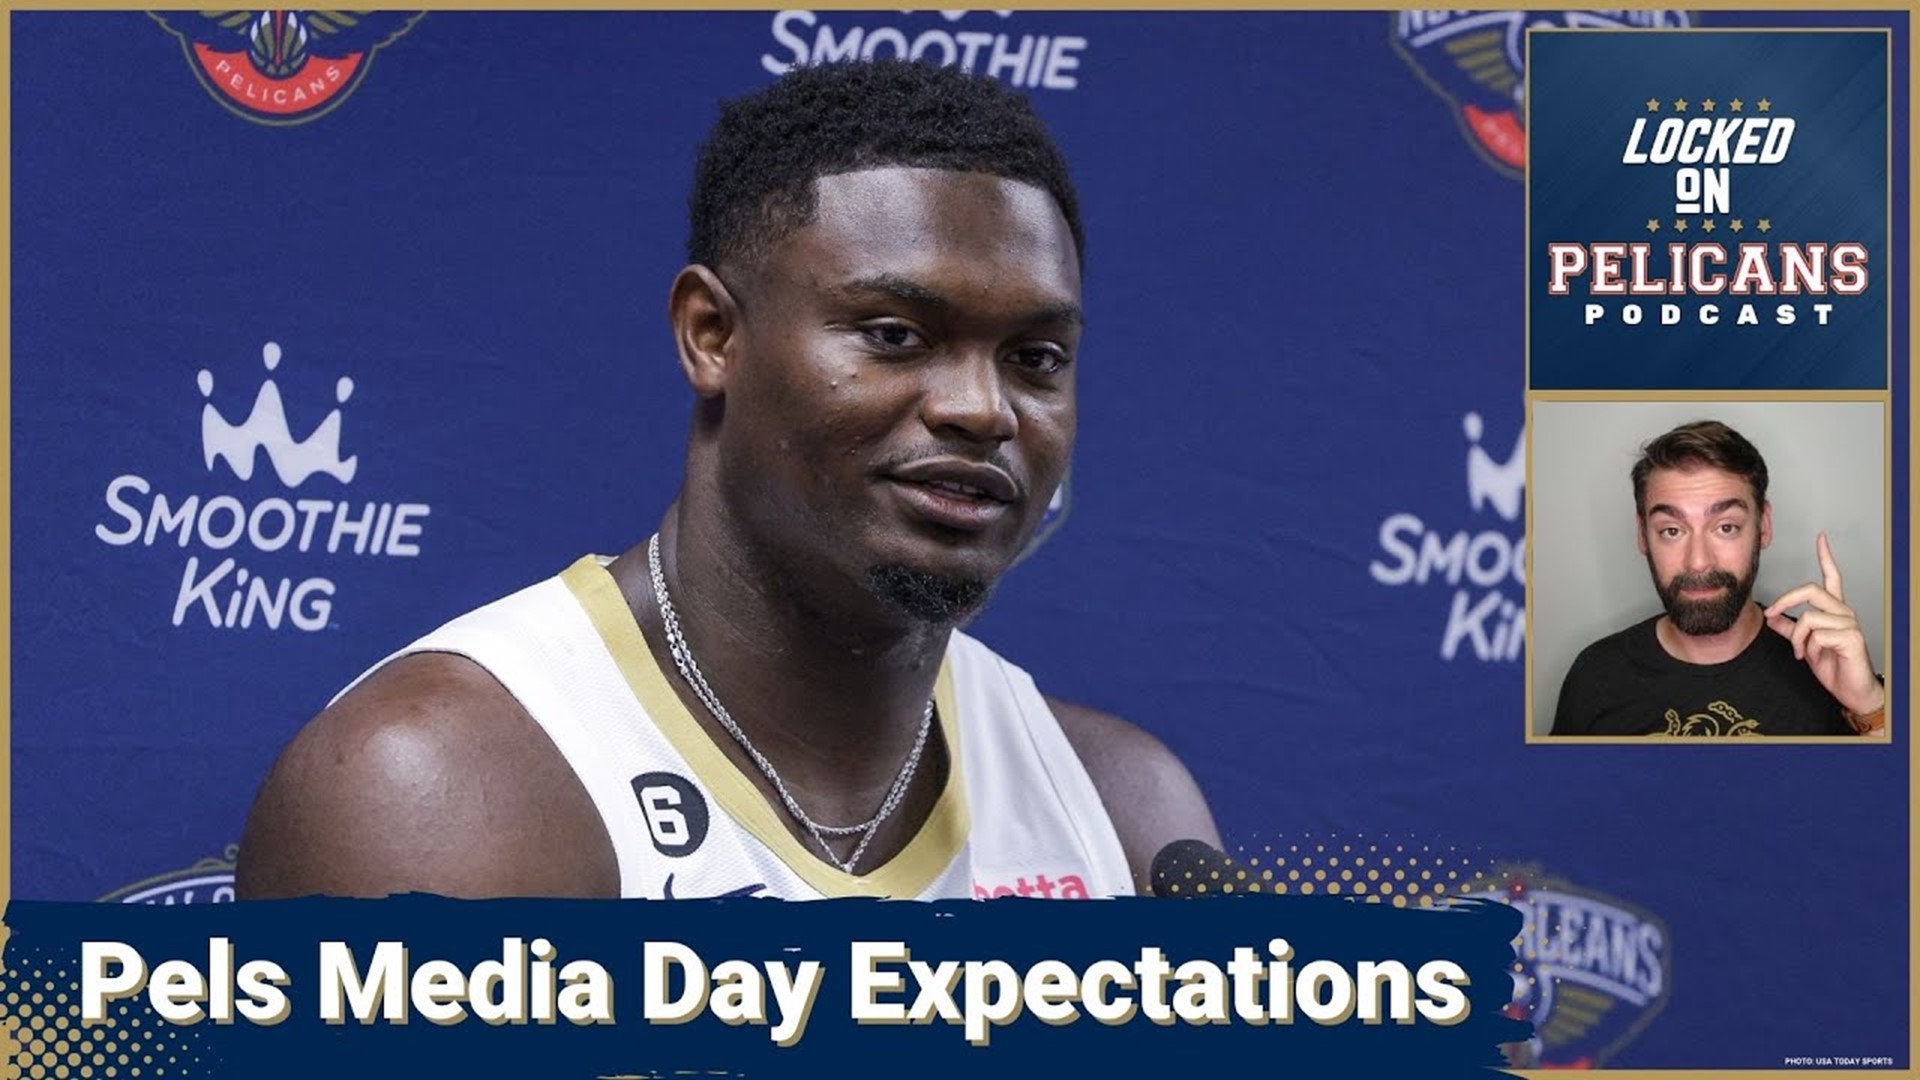 It's Media Day for the New Orleans Pelicans and that means we get to hear from Zion Williamson and the rest of the team.